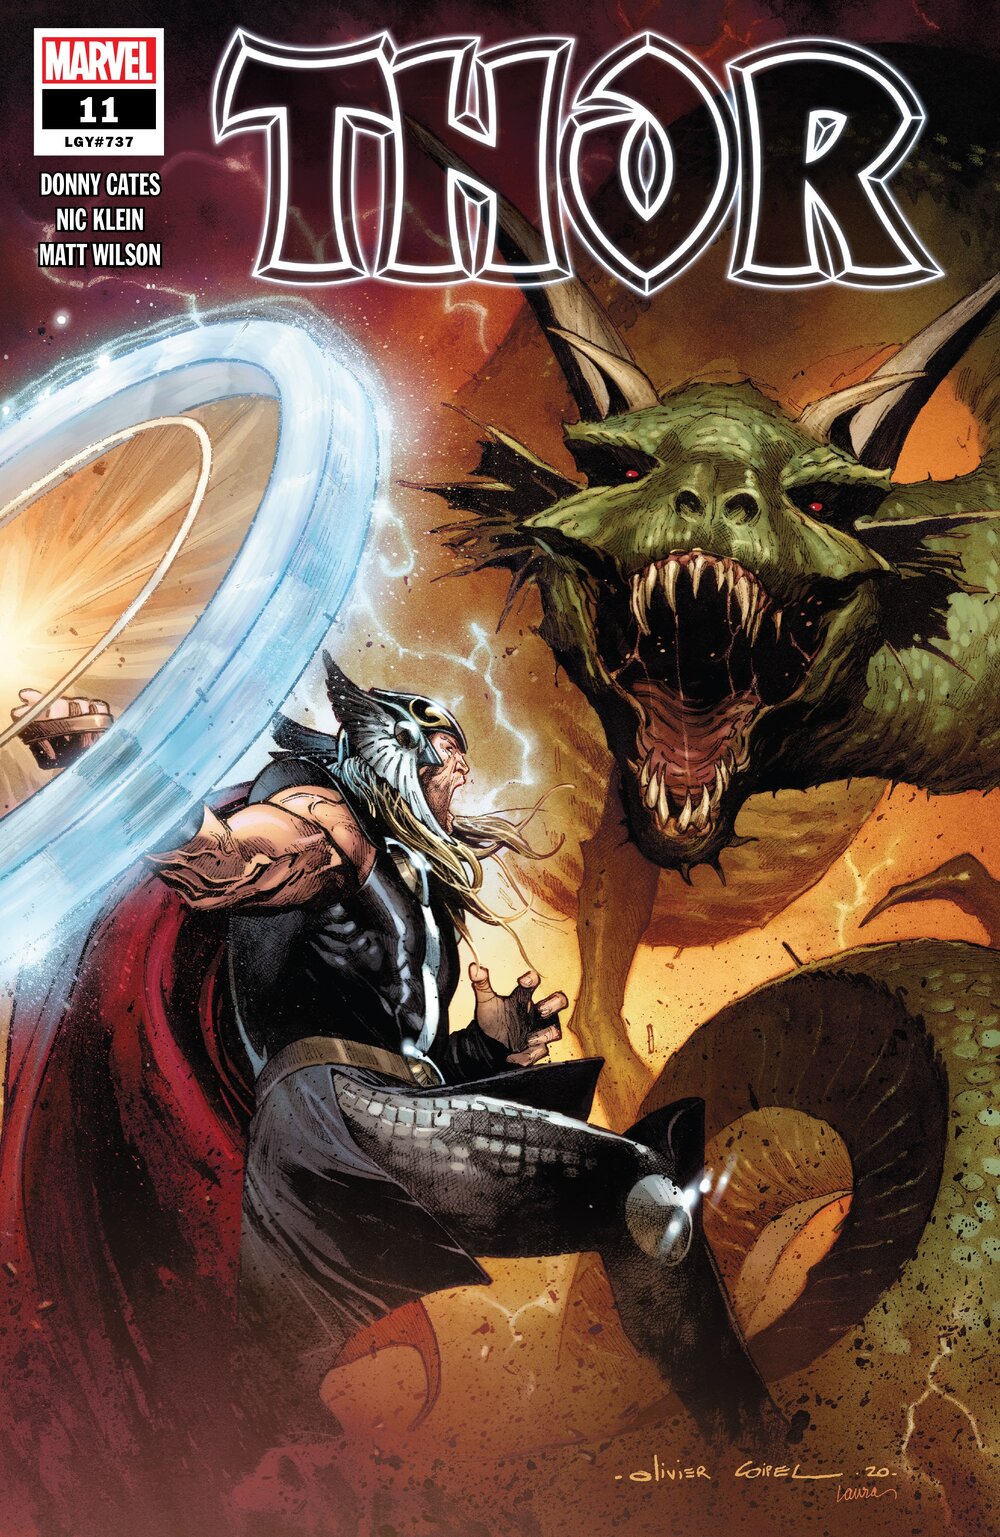 Review: Is Thor the new god of the Marvel Universe?